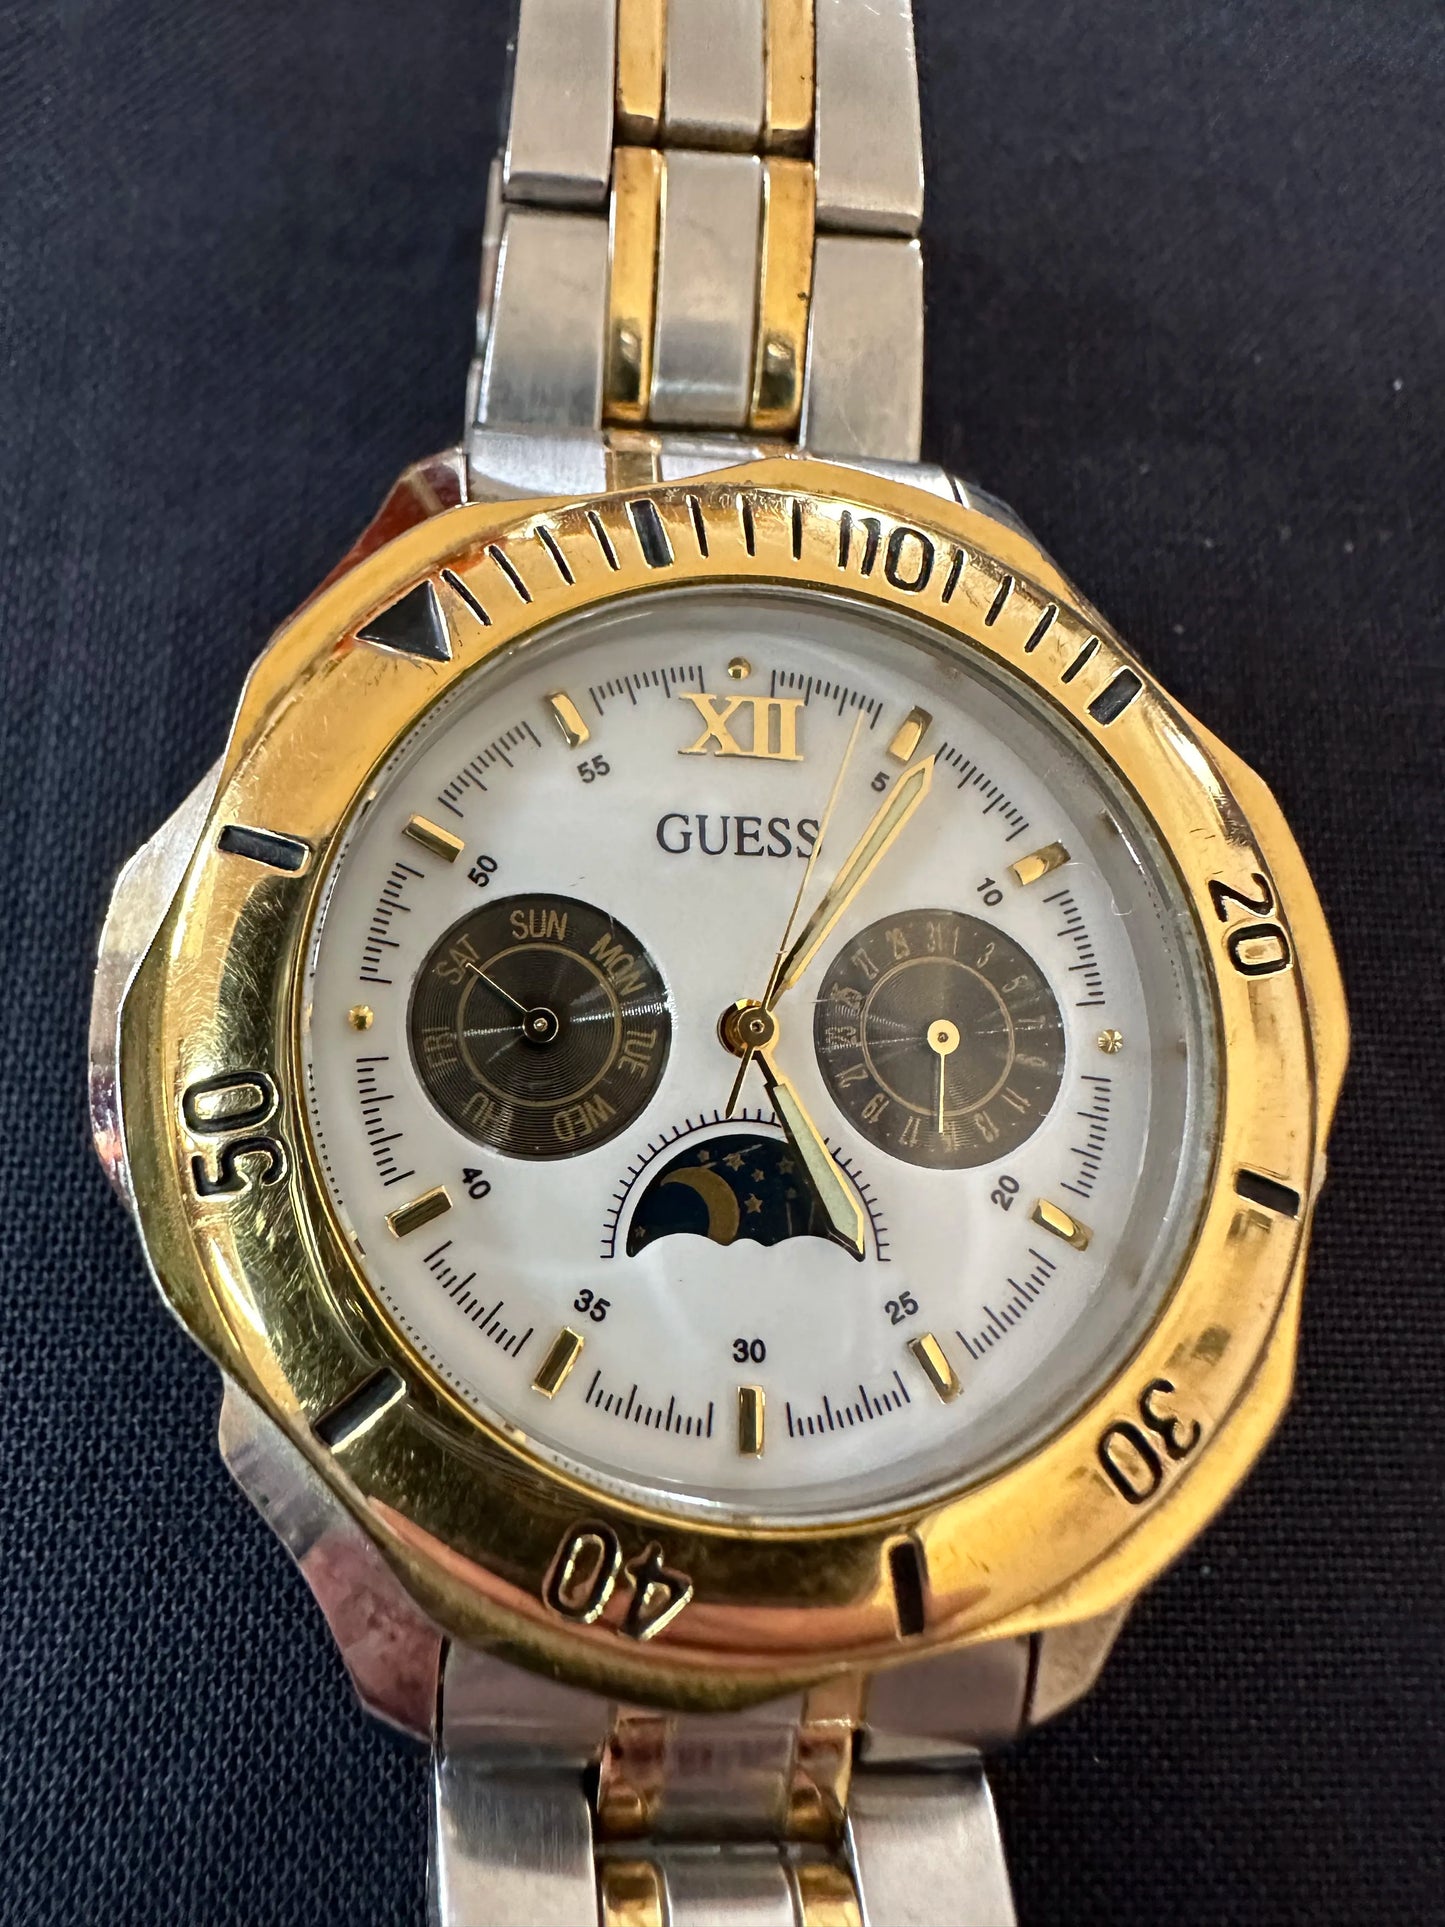 Guess Moon Phase Chronograph Watch WR